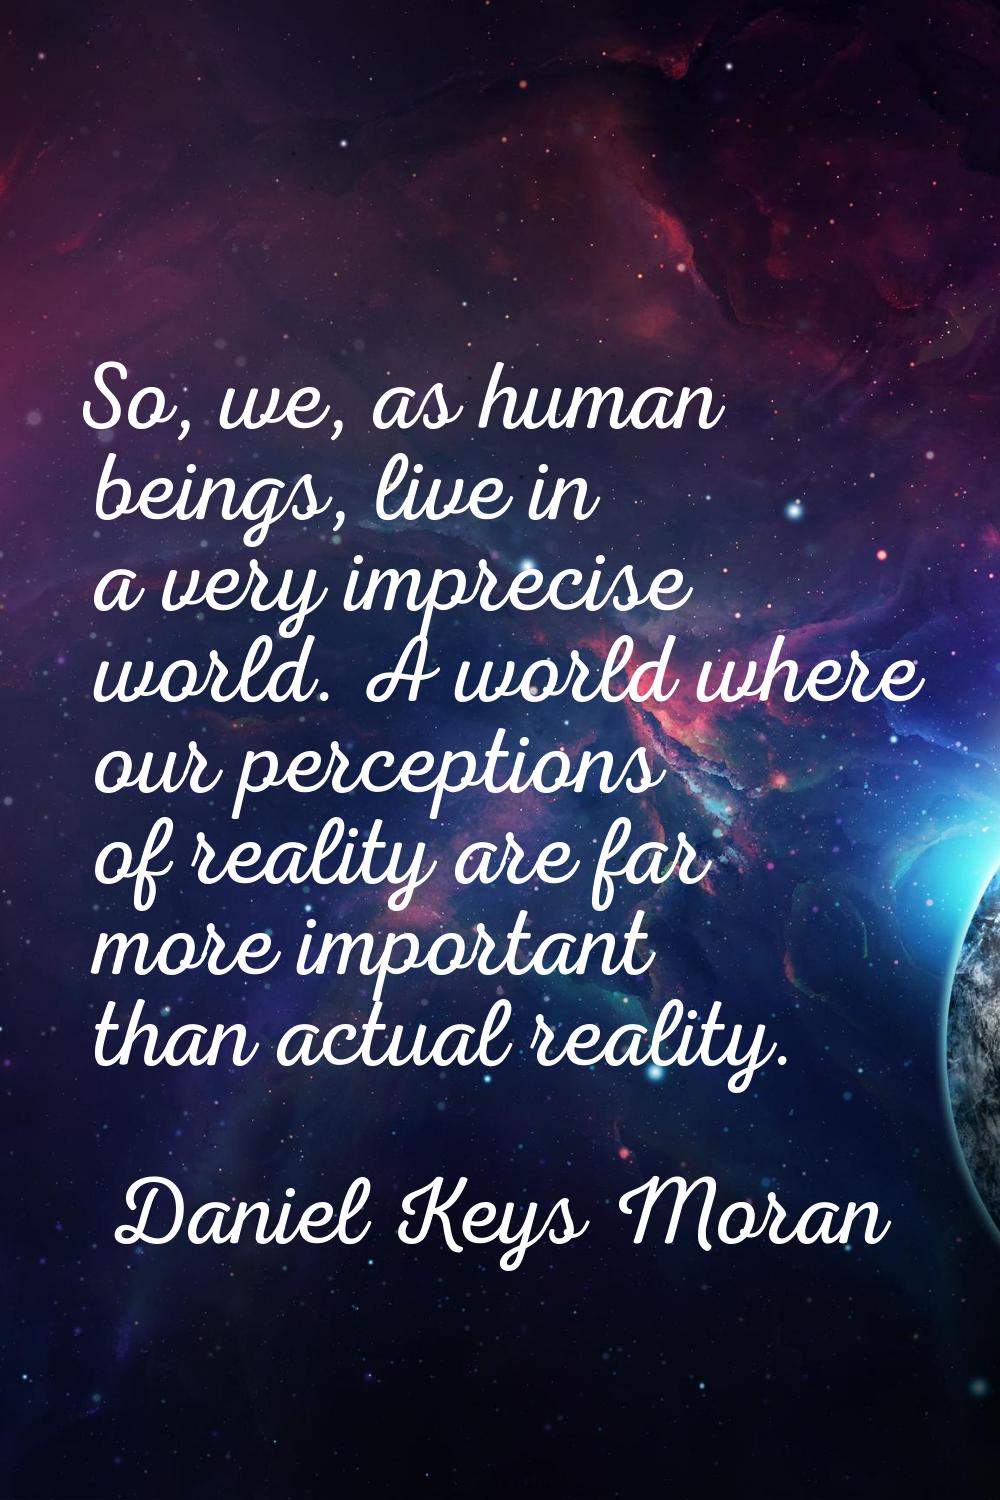 So, we, as human beings, live in a very imprecise world. A world where our perceptions of reality a